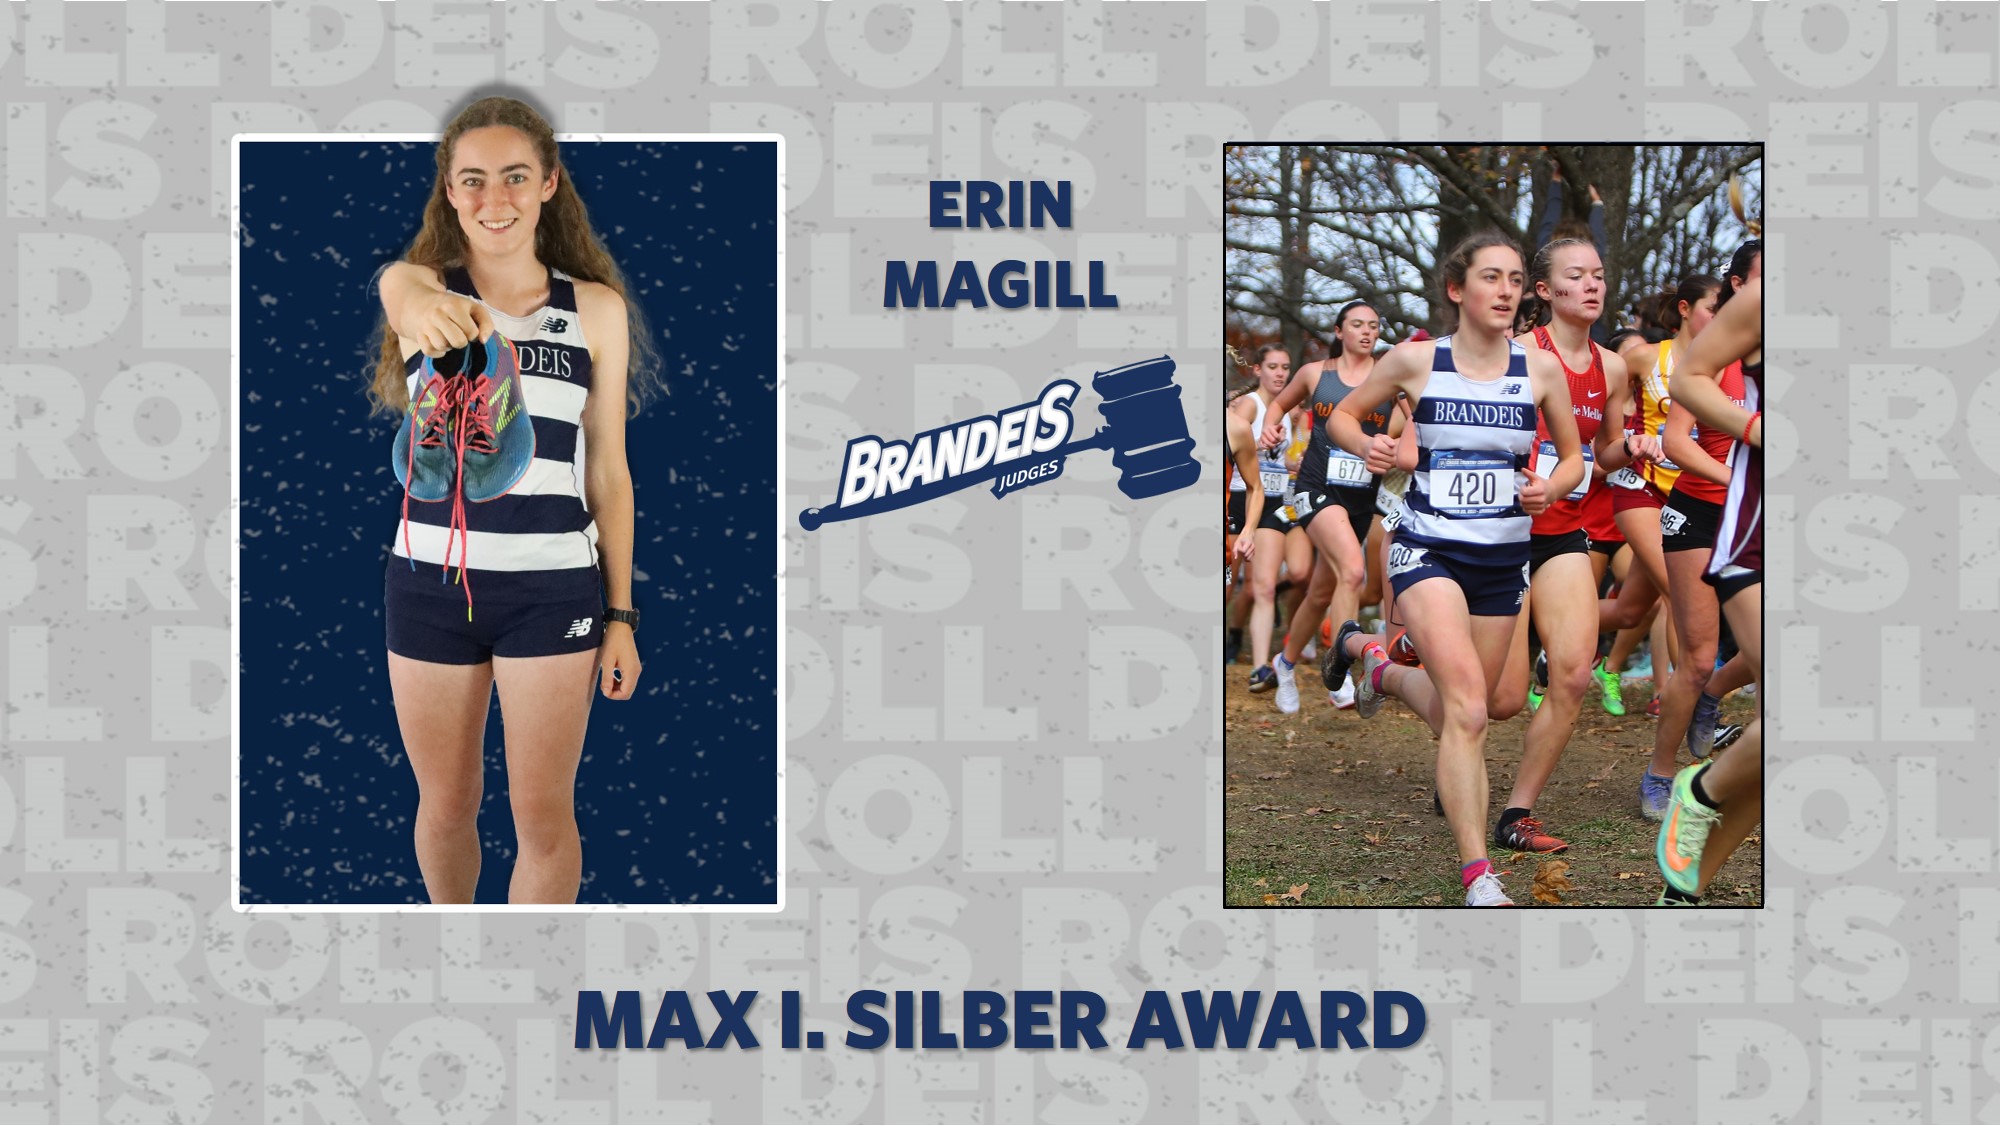 TEXT: Erin Magill, Max I. Silber AwardIMAGES: Erin Magill posing in uniform, holding a pair of sneakers in front of her; Erin in action running in front of a large group at the NCAA Cross Country Championships